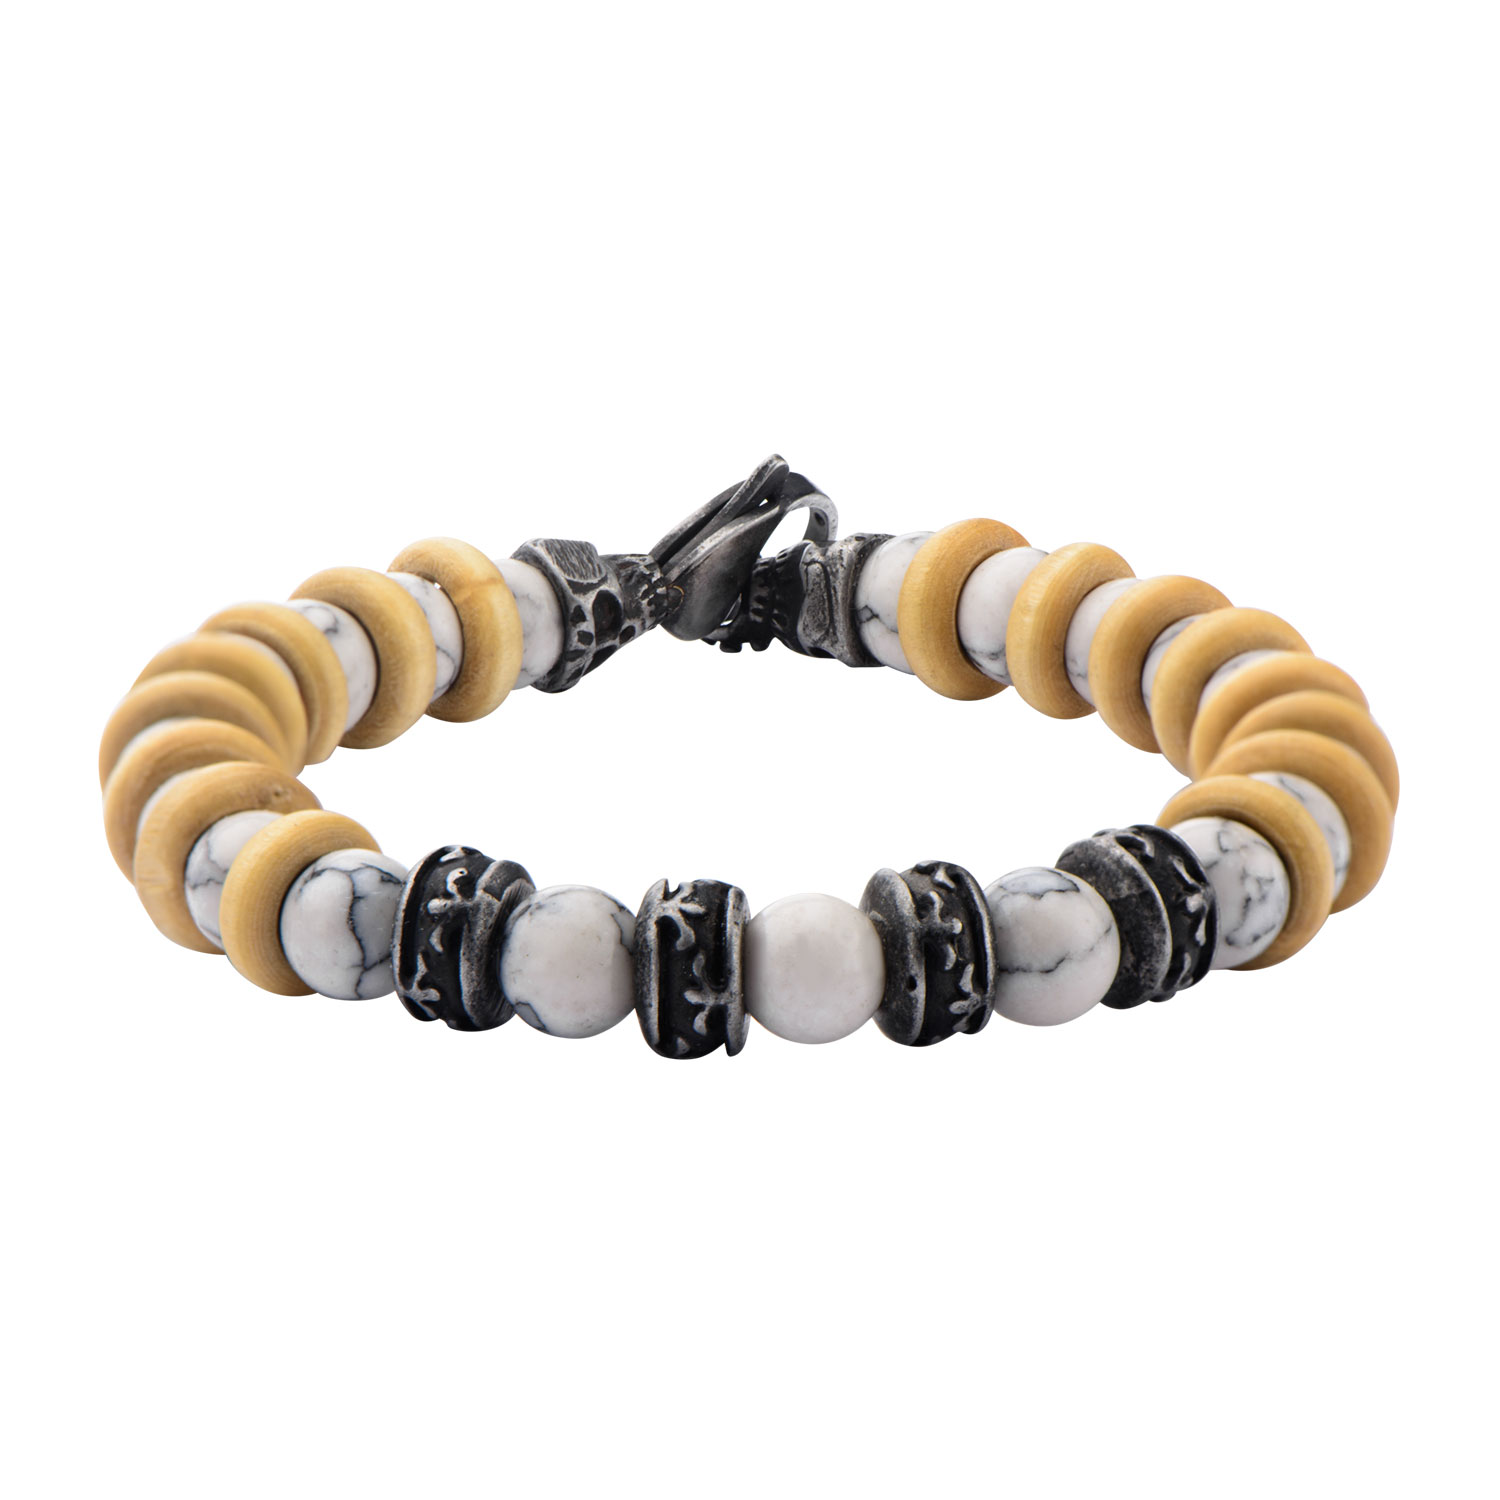 8mm White Howlite Beads with Taupe Wood Separators Bracelet Jayson Jewelers Cape Girardeau, MO